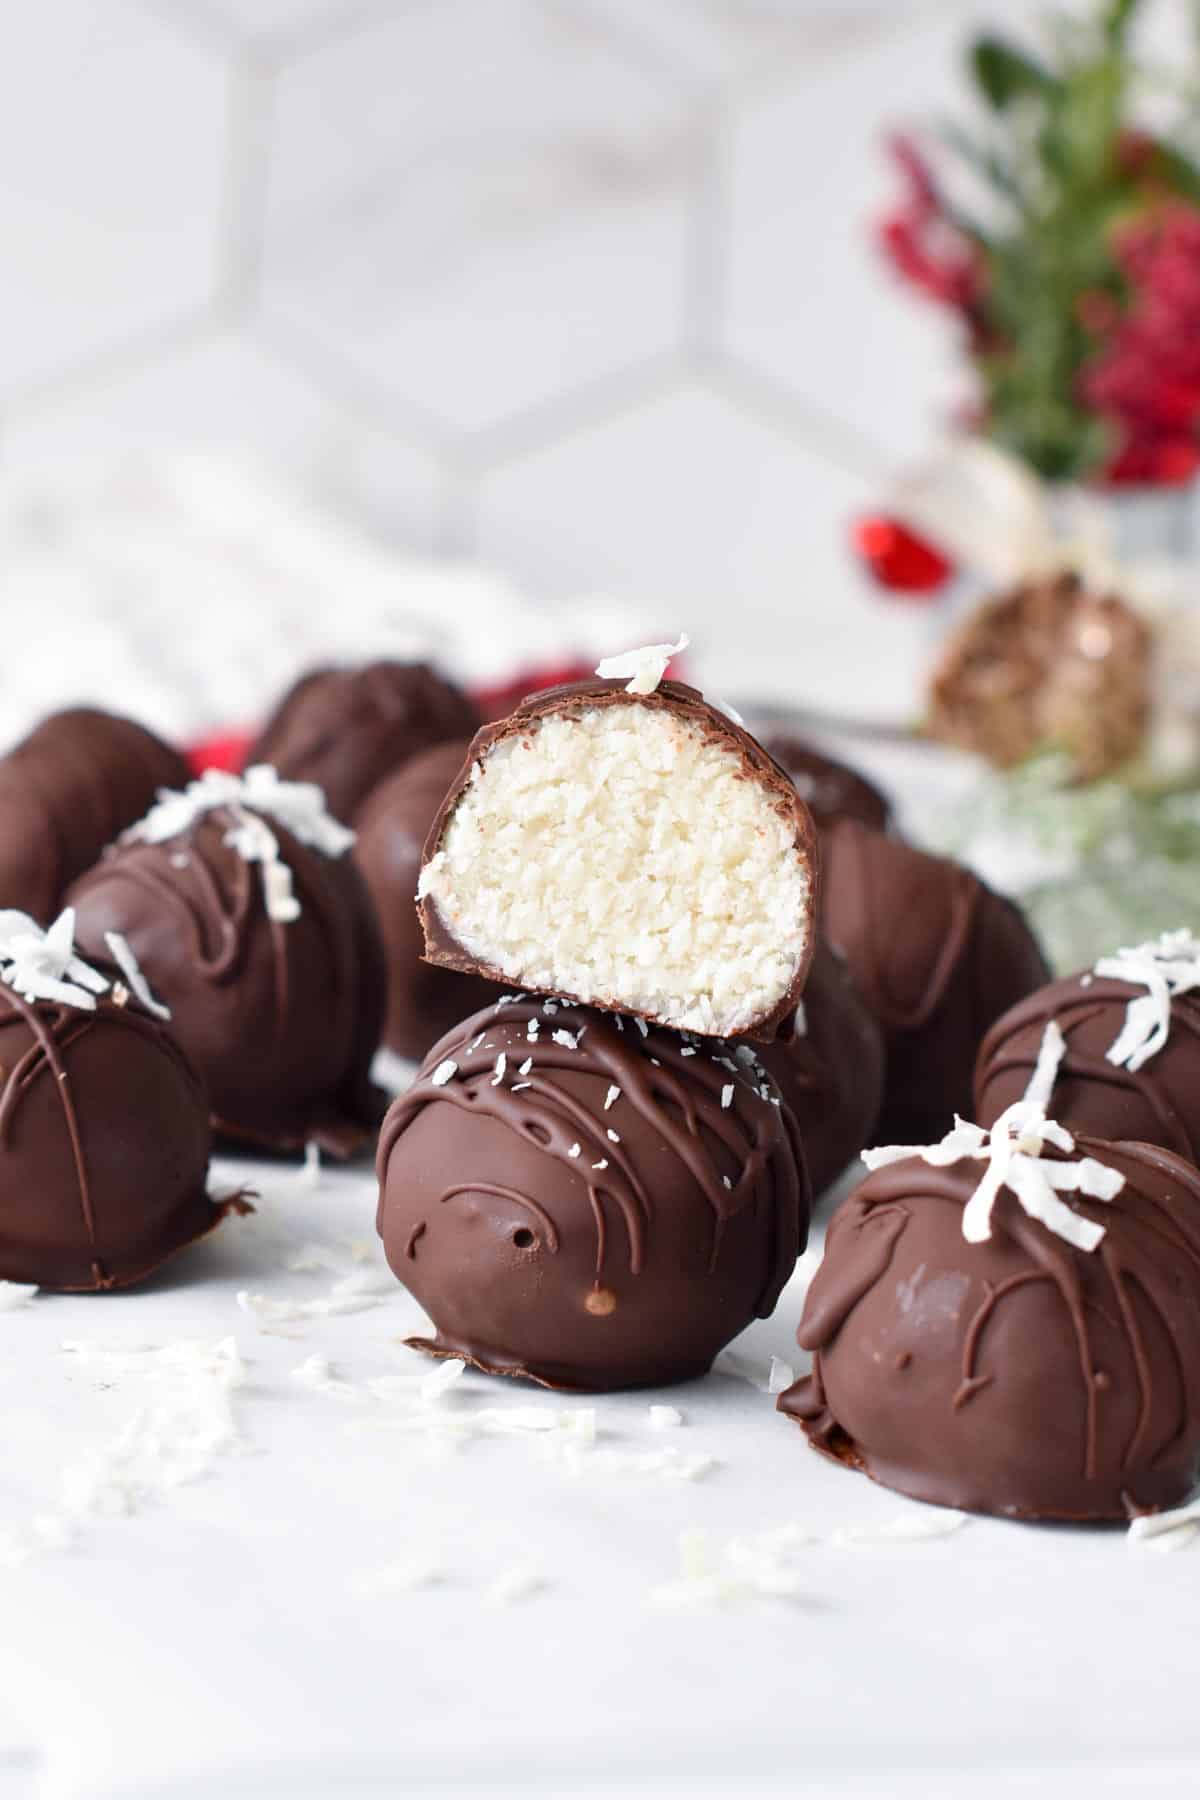 A stack of chocolate coconut balls with one balls cut halfway showing the coconut mixture inside